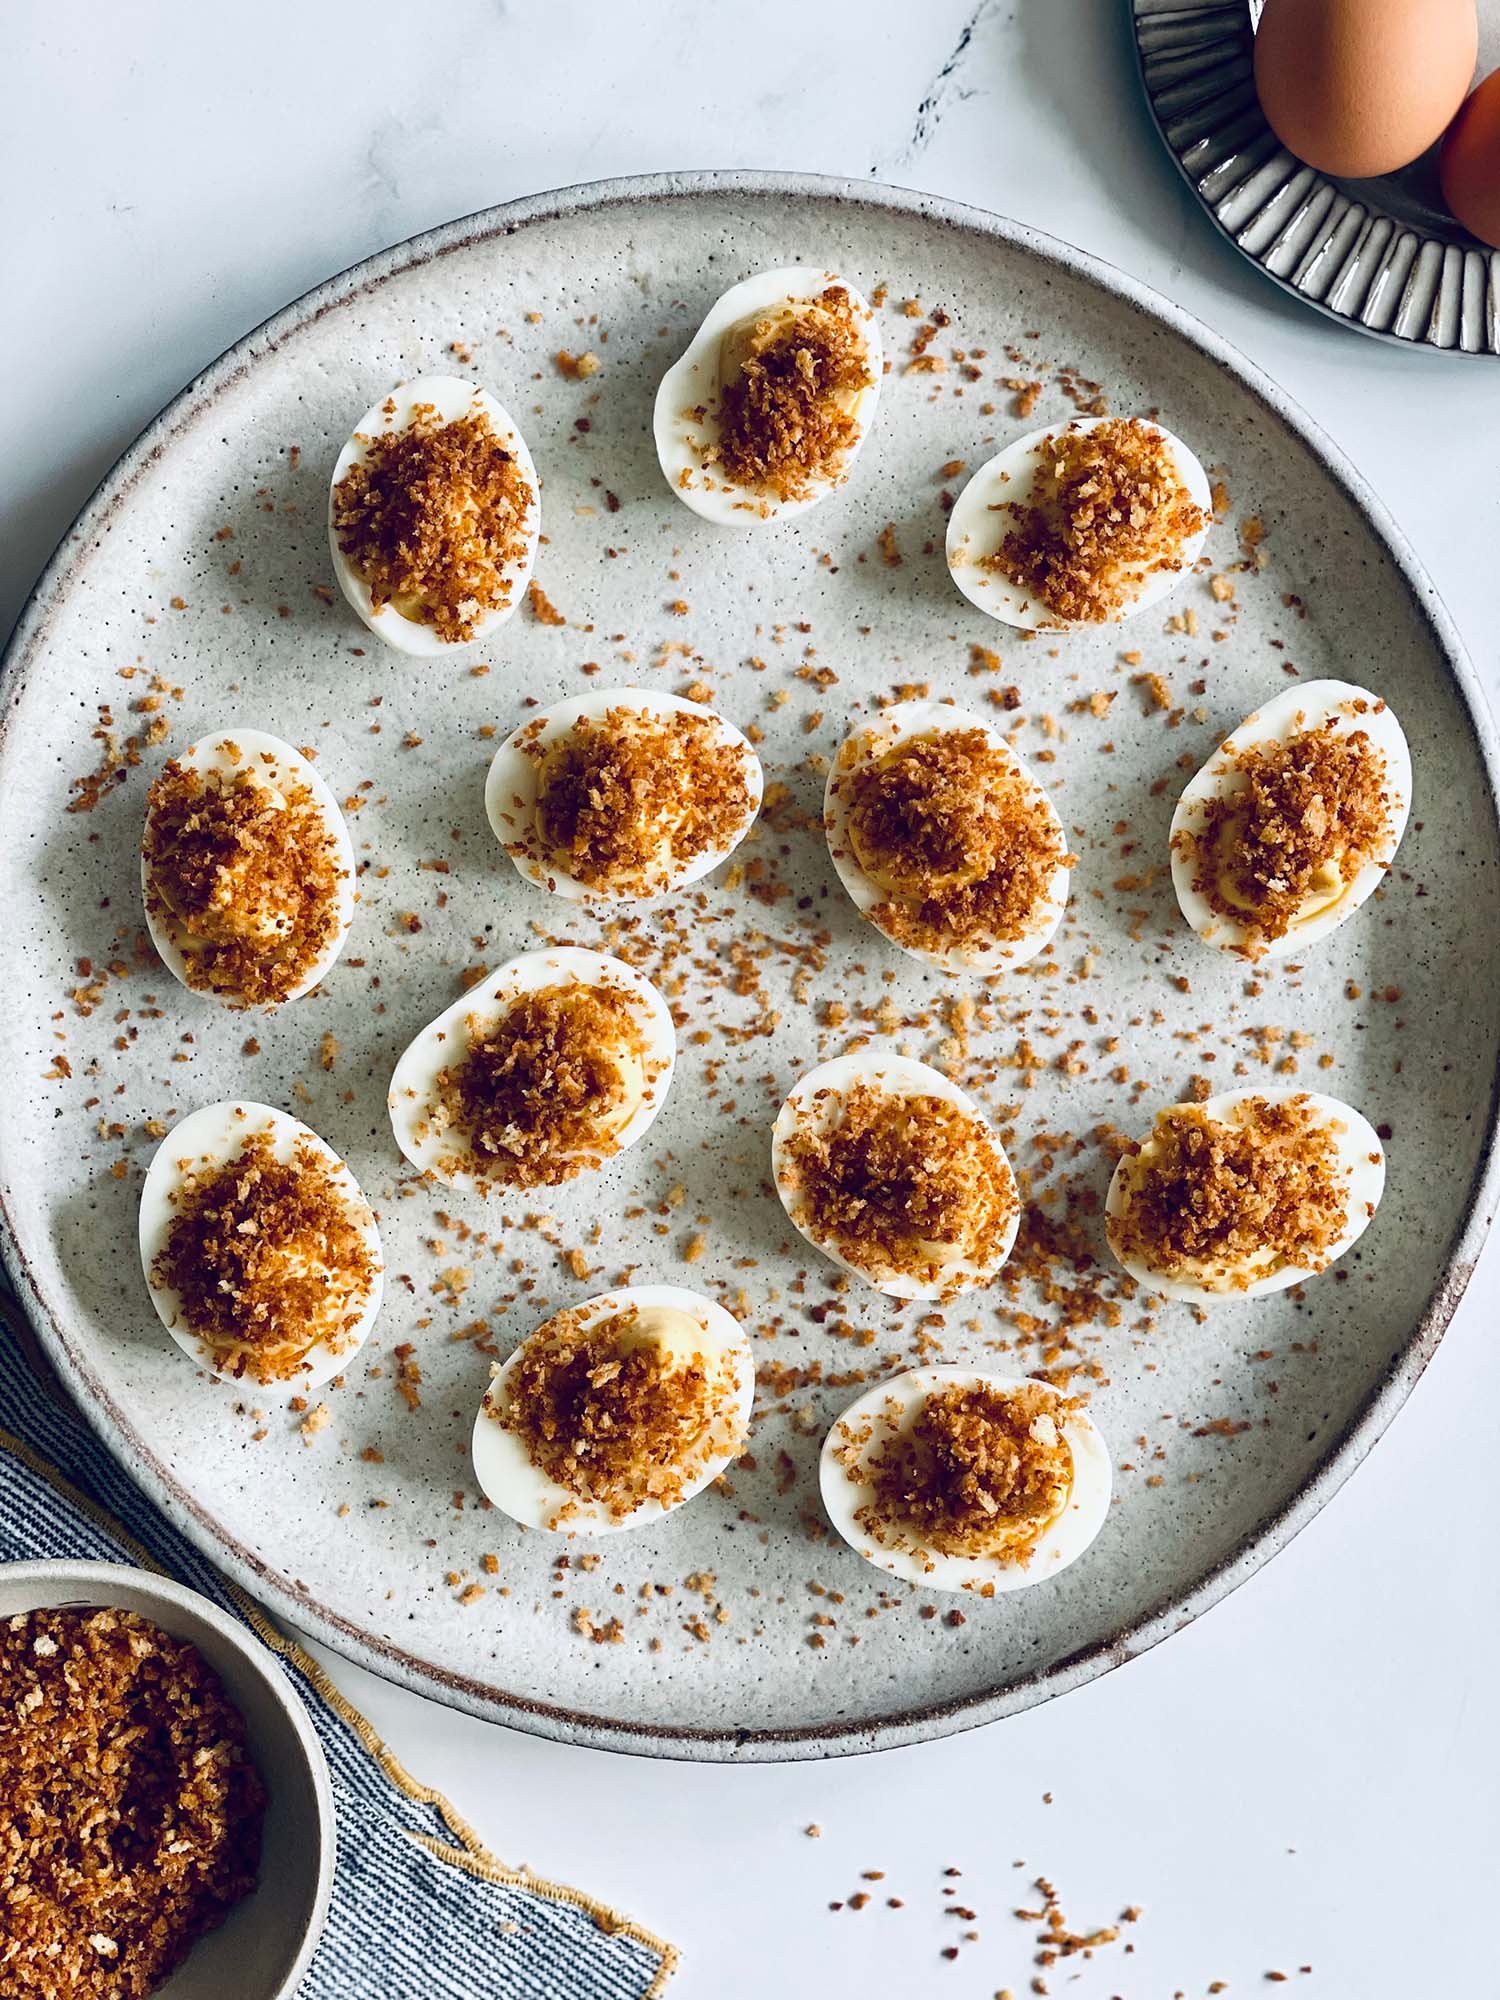 Deviled Egg with Labneh Vanilla Whipped Yolks and Smoky Panko